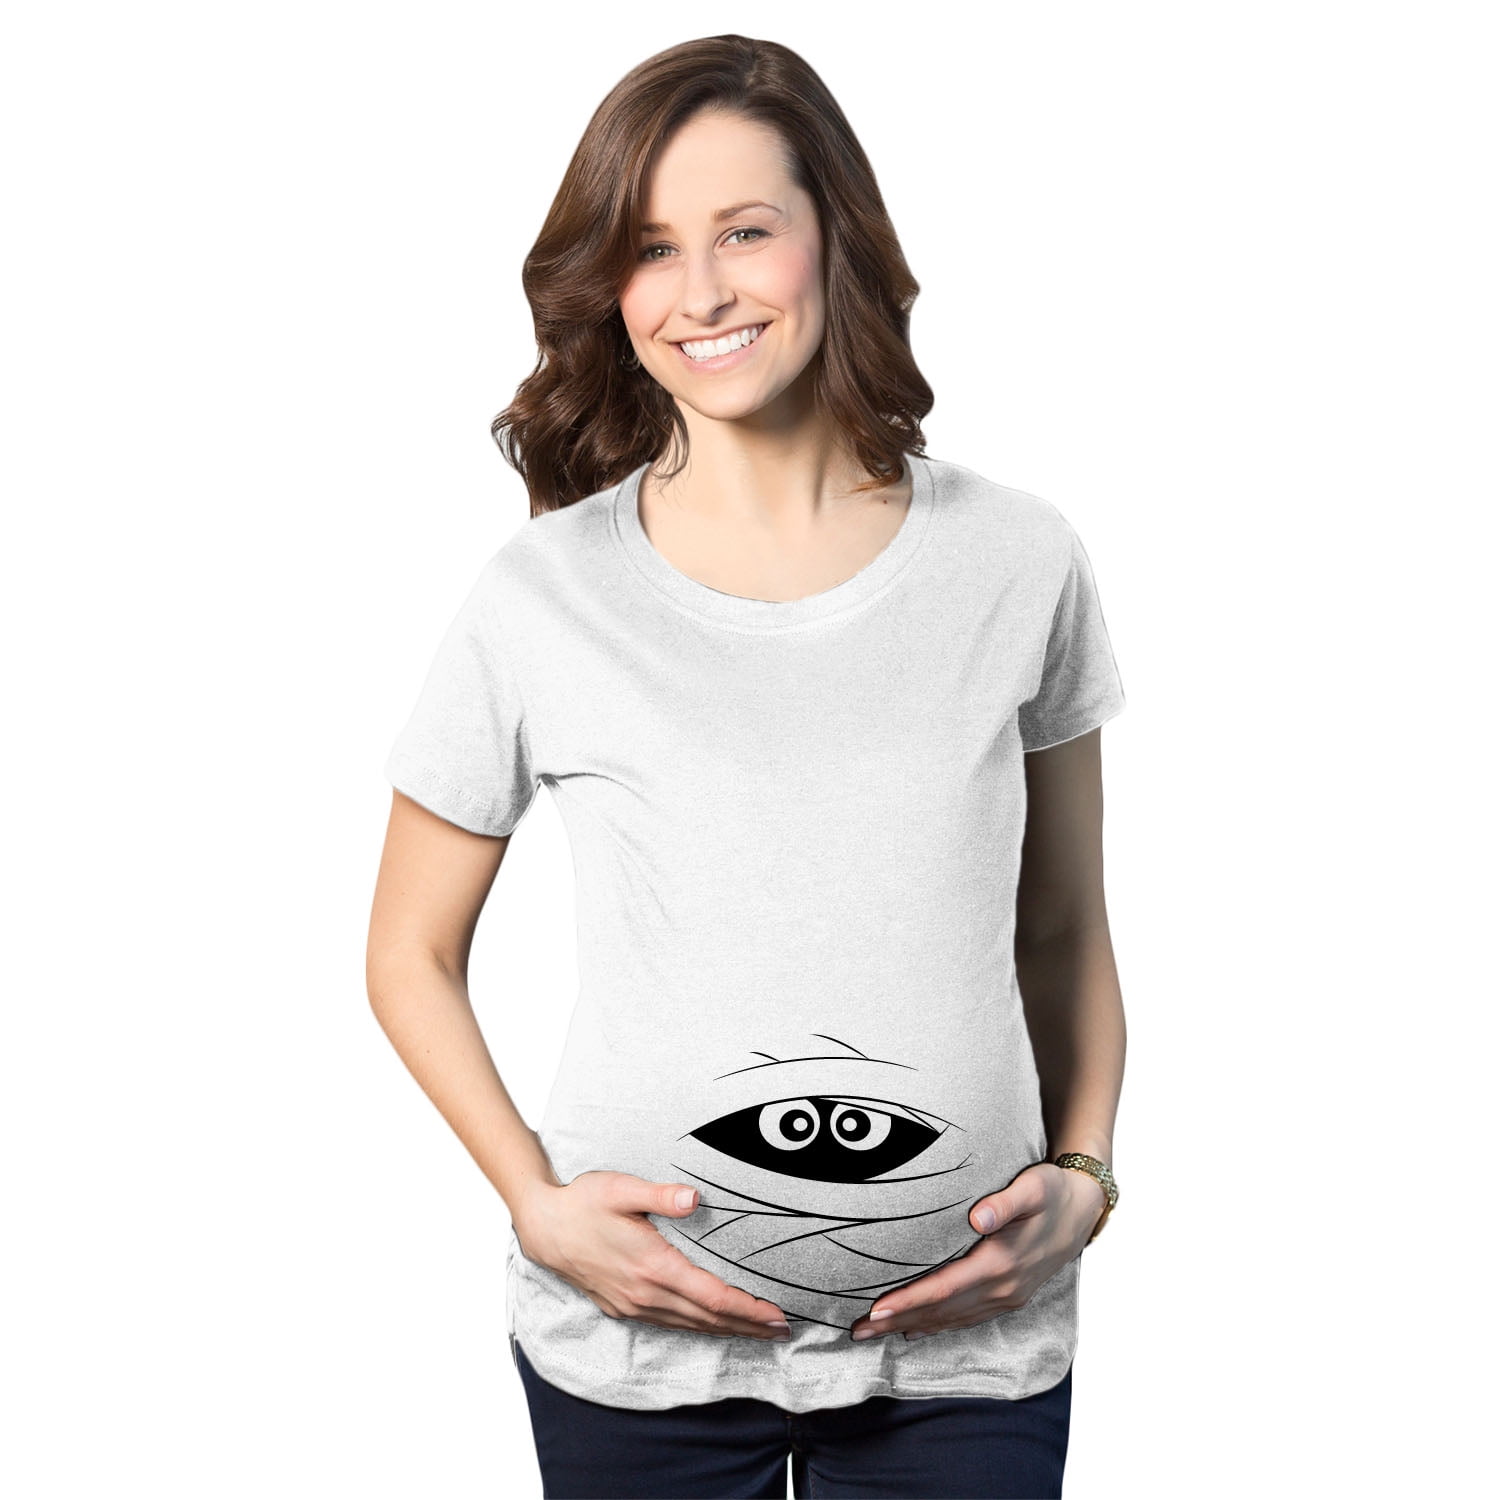 Maternity T-Shirts for Sale